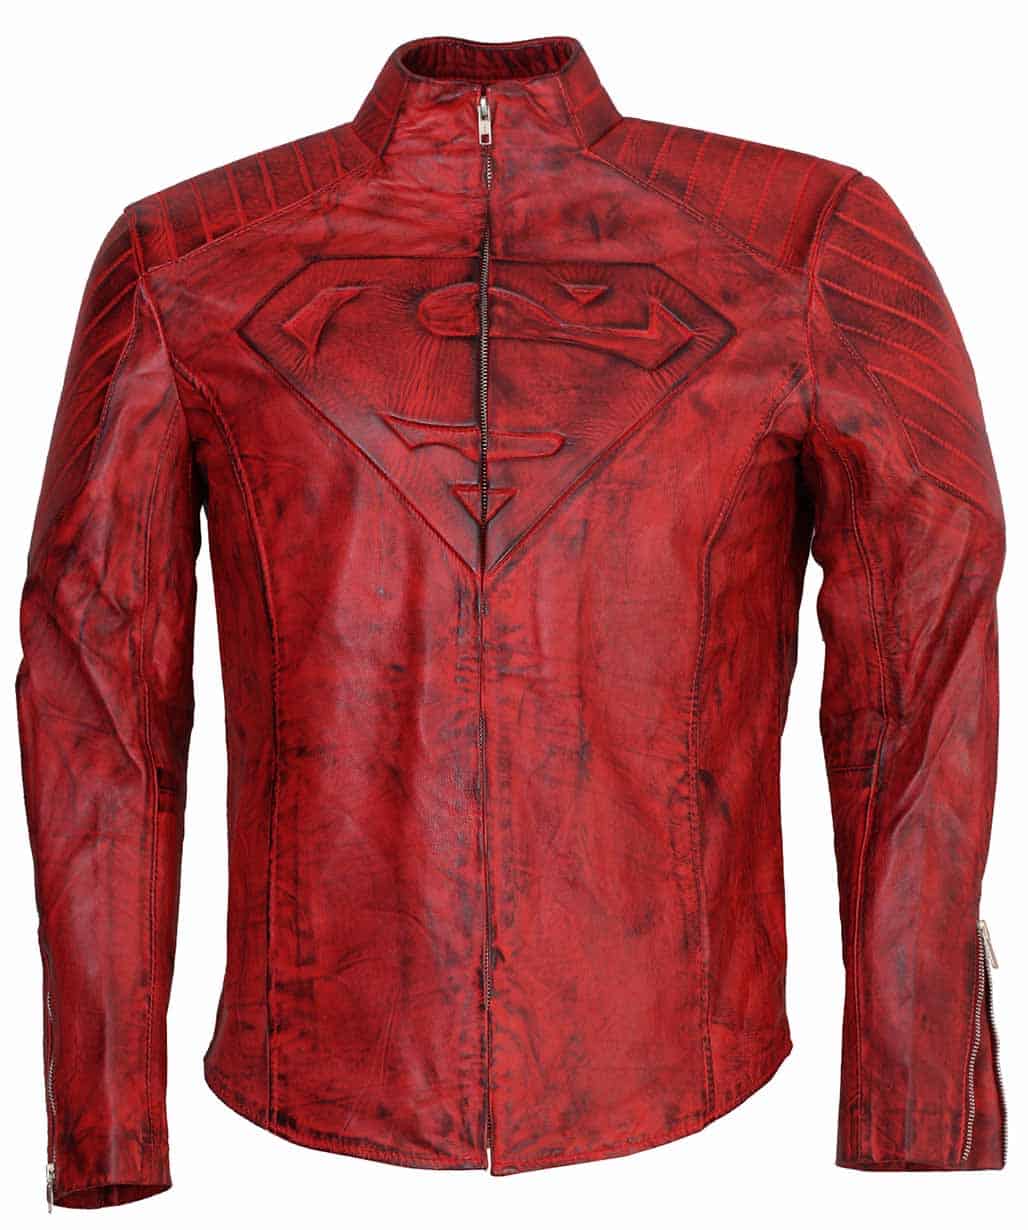 superman-red-waxed-leather-jacket-outfit